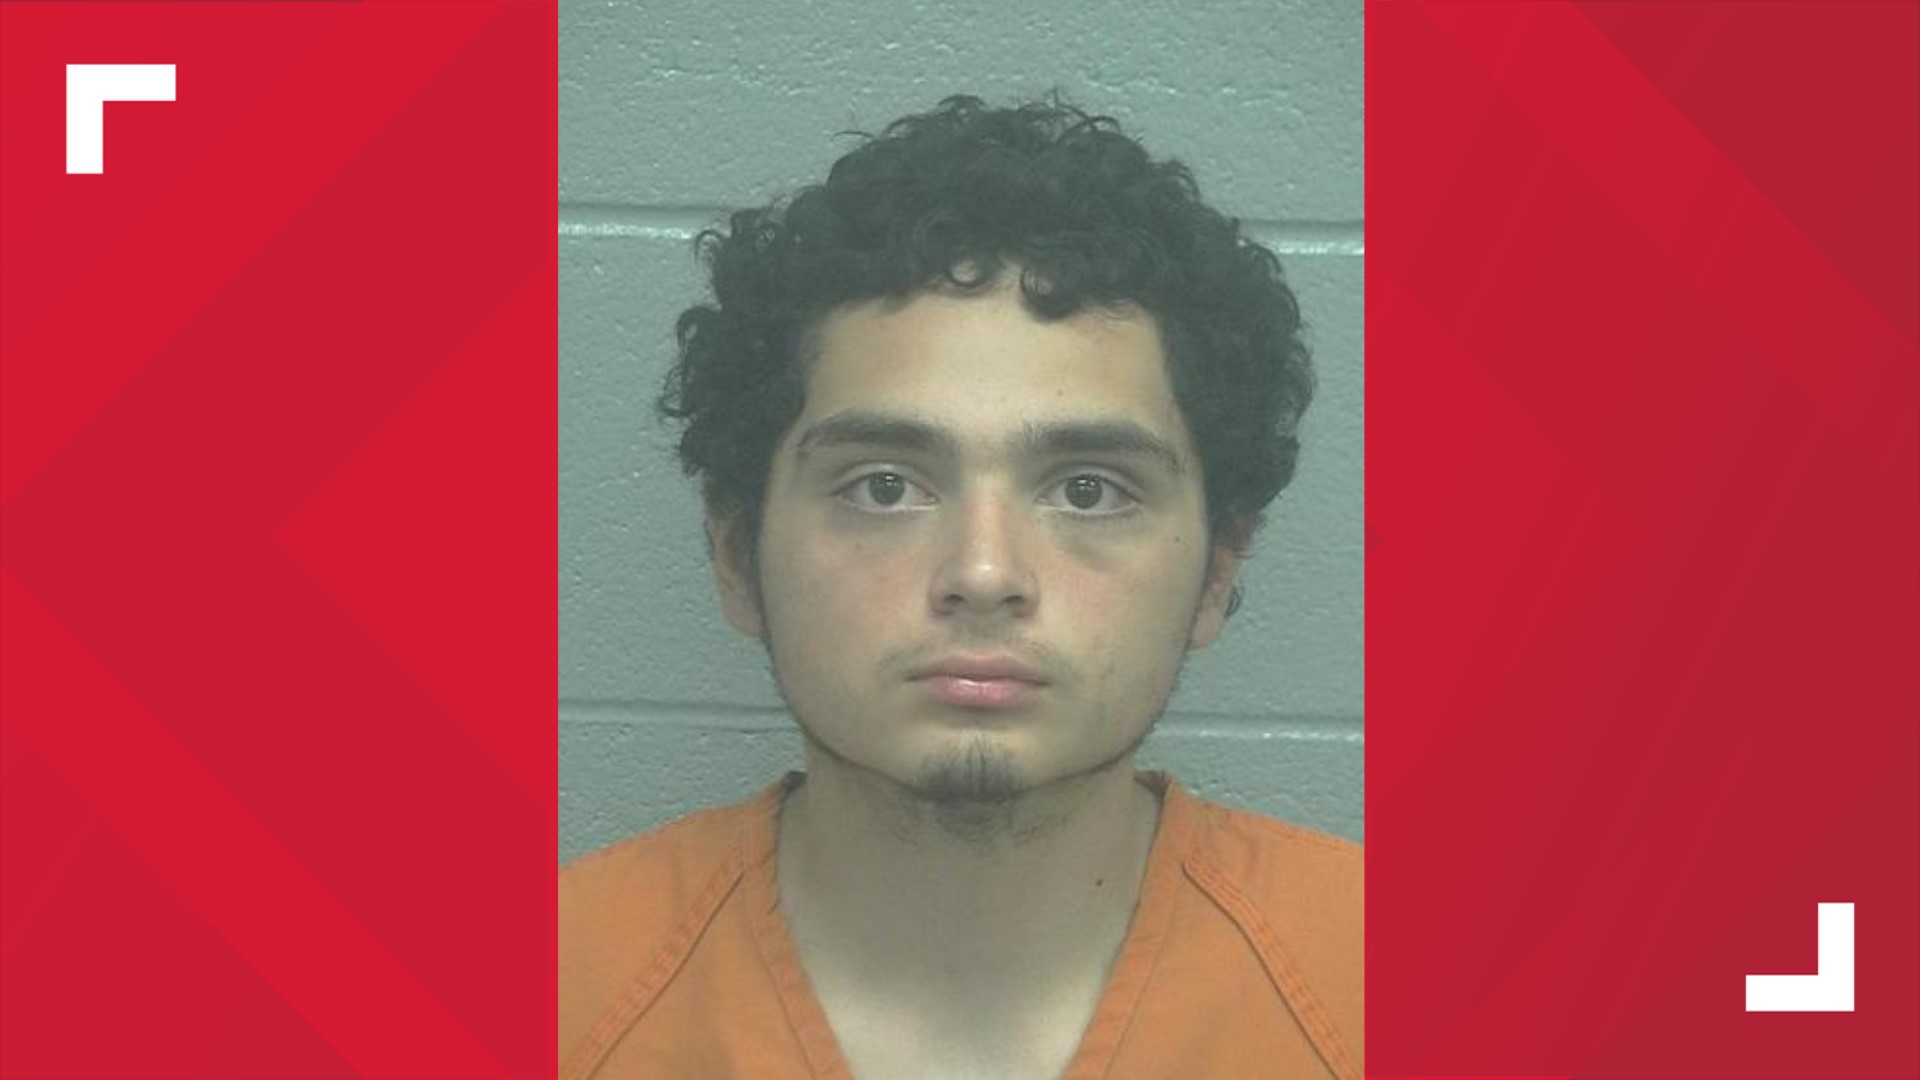 Jose Gomez III stabbed several people, including two children and a Sam's Club employee in March of 2020.